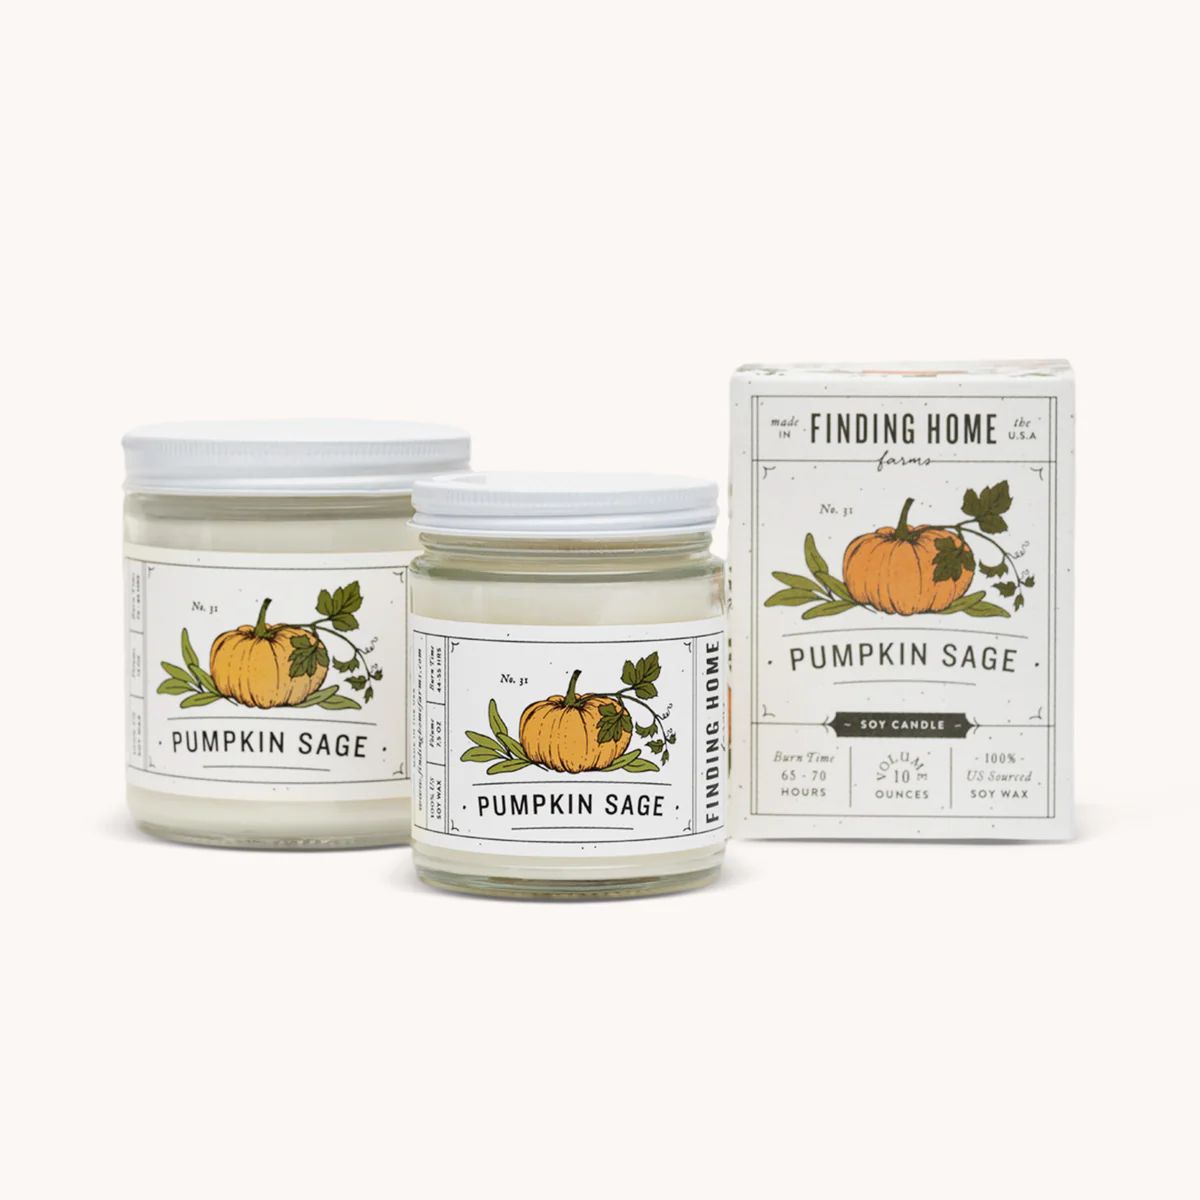 Pumpkin Sage Soy Candles - Pumpkin Scented Candles | Fall Soy Candles | Finding Home Farms